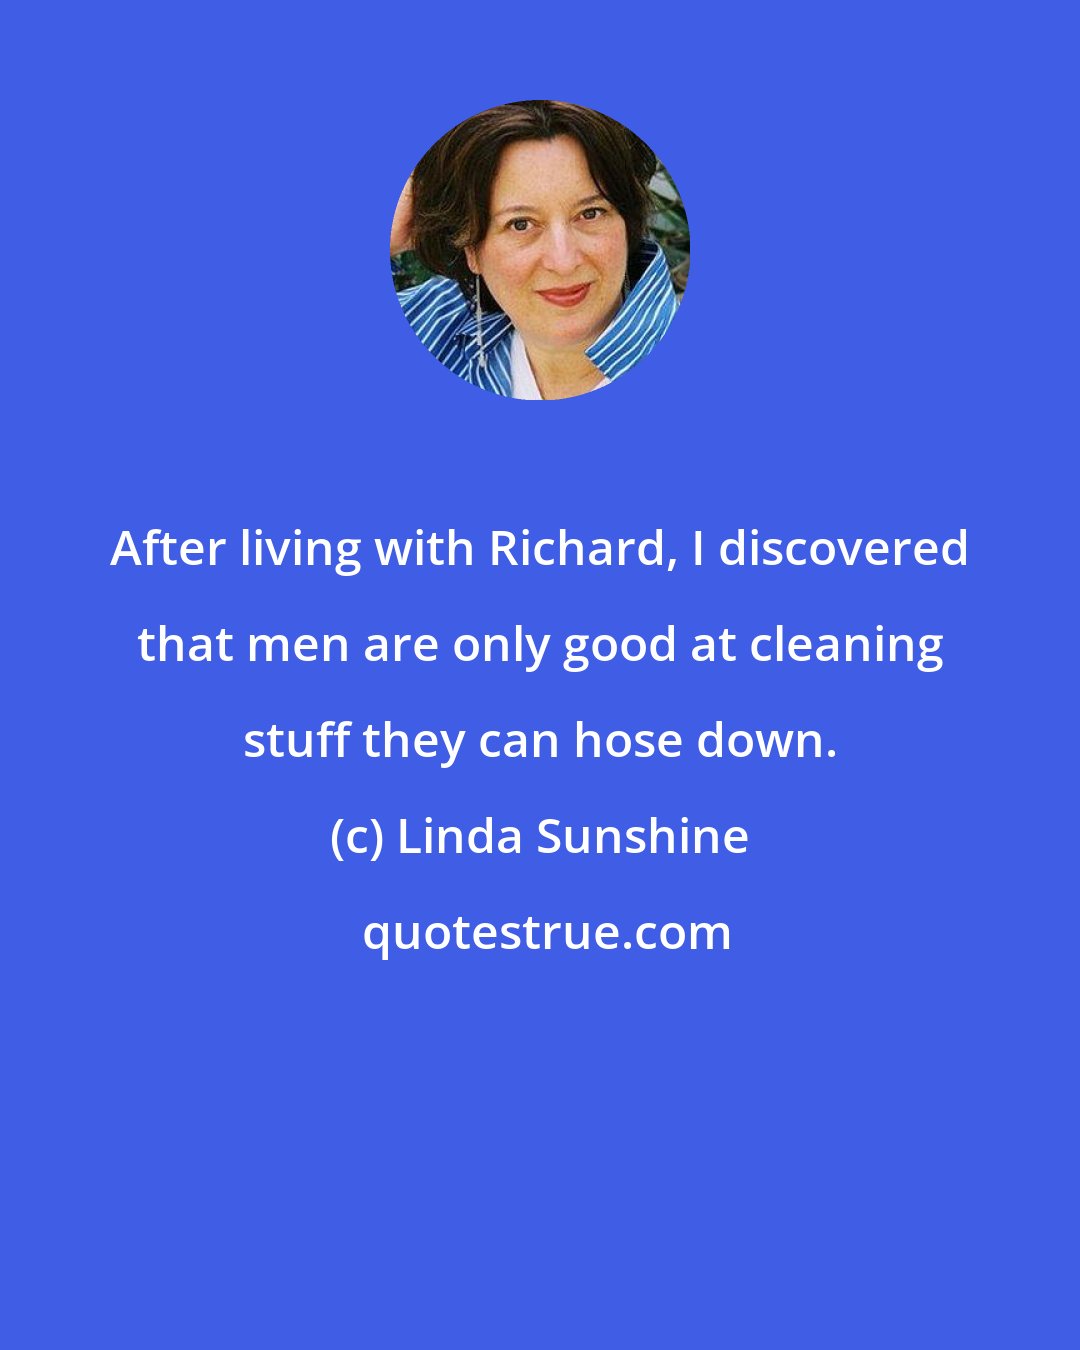 Linda Sunshine: After living with Richard, I discovered that men are only good at cleaning stuff they can hose down.